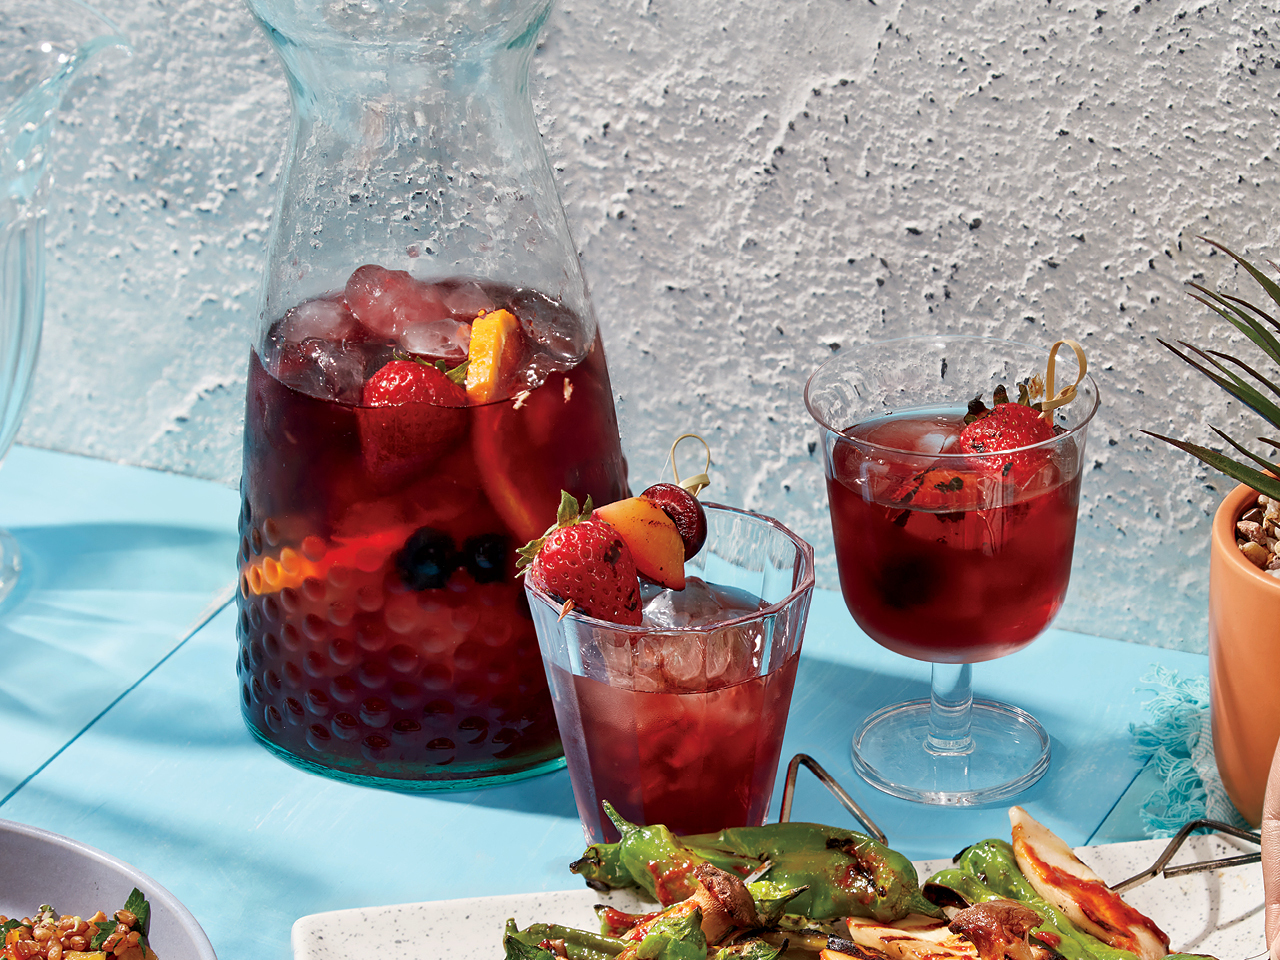 A pitcher of fruit-filled sangria with ice and a tumbler with a skewer of strawberries and fruit and sangri and a stemmed glass with the same skewr in the sangria on a blue table against a white stucco wall